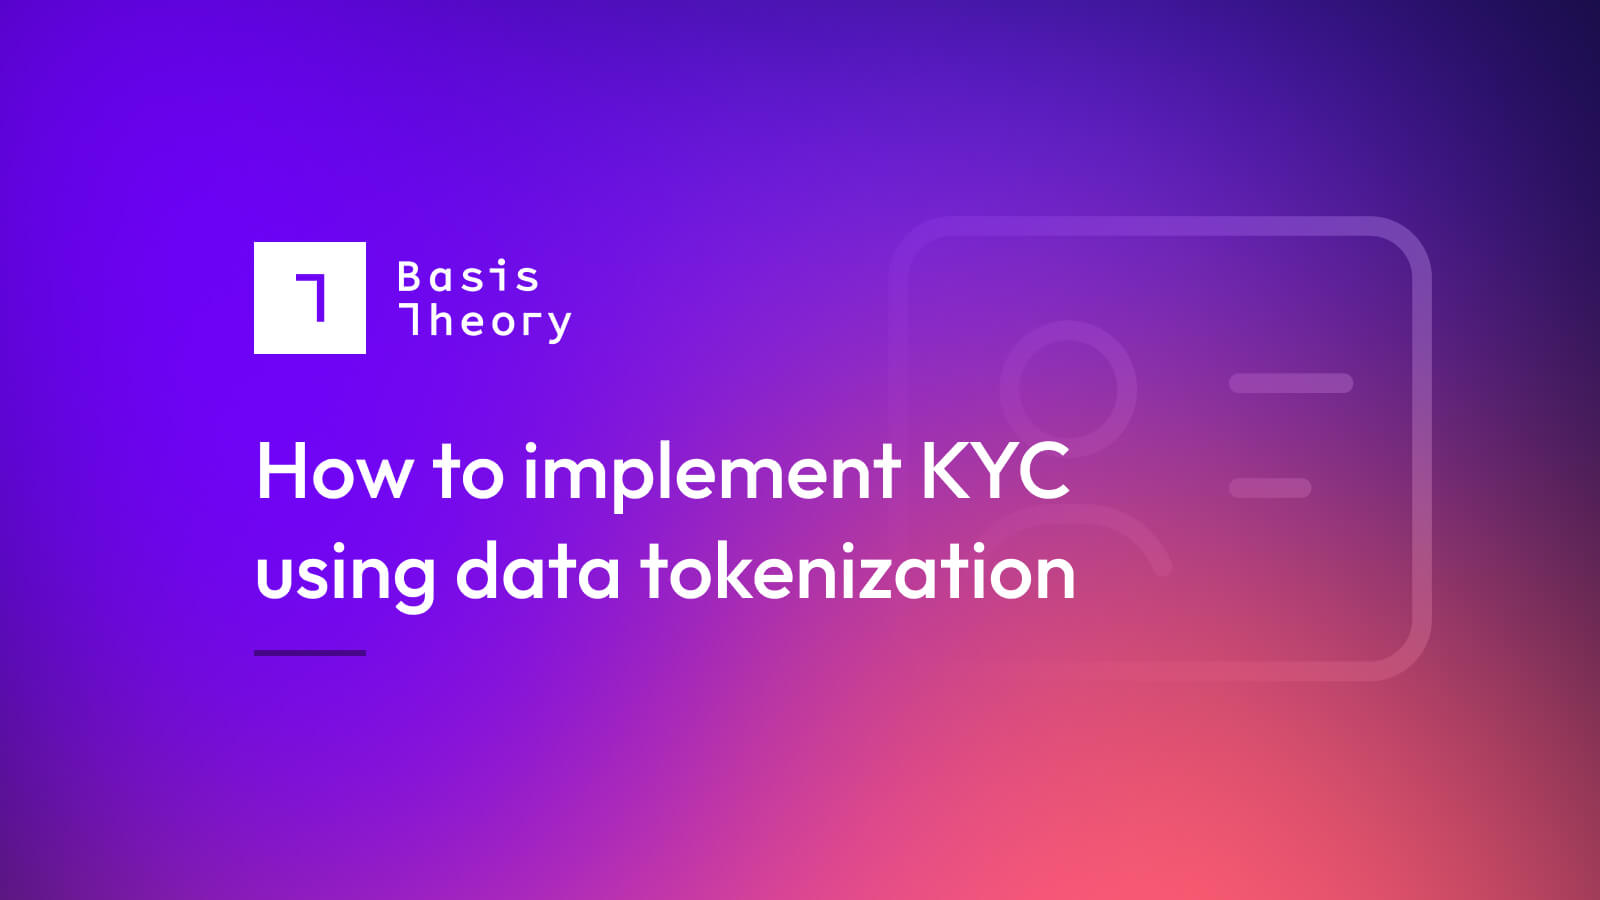 How to implement KYC using data tokenization